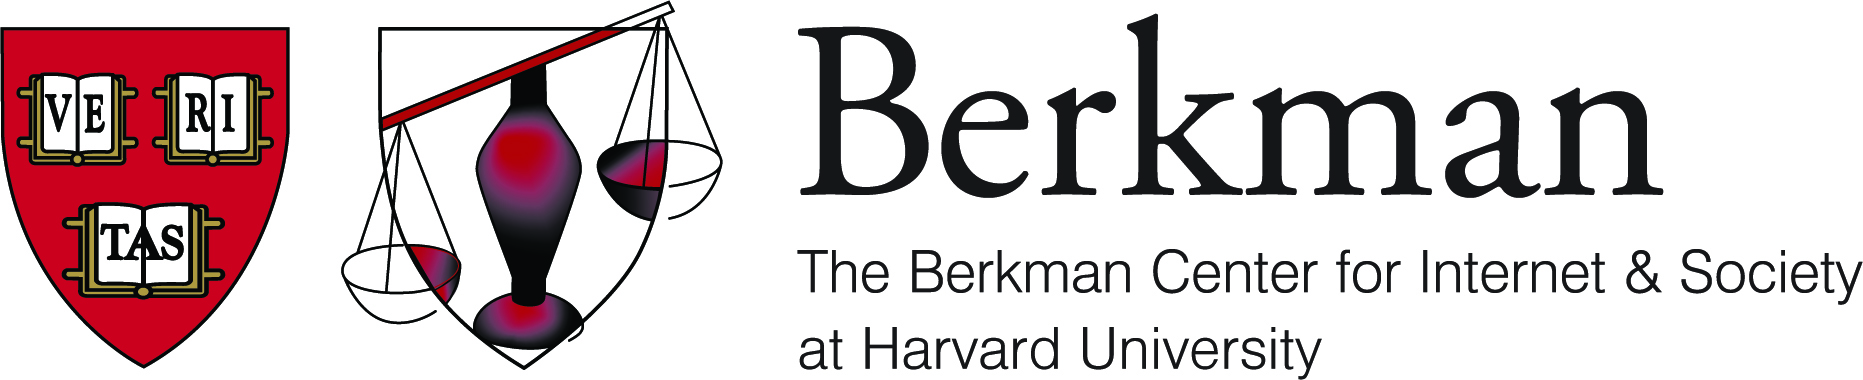 Open Call for Fellowship Applications at Berkman Center for Internet and Society,Harvard University
  